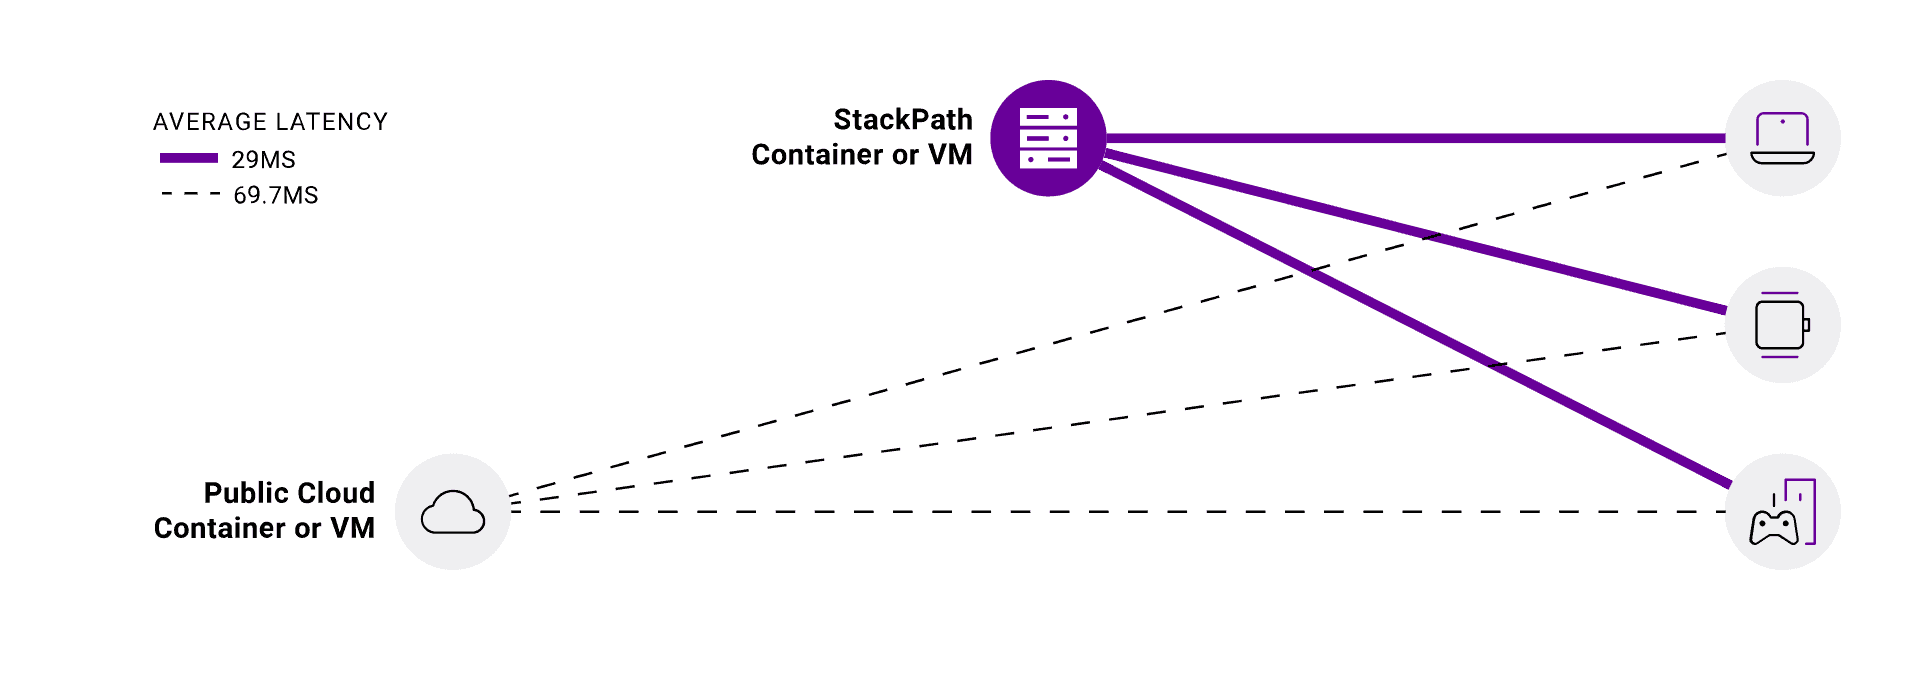 Stackpath network reach